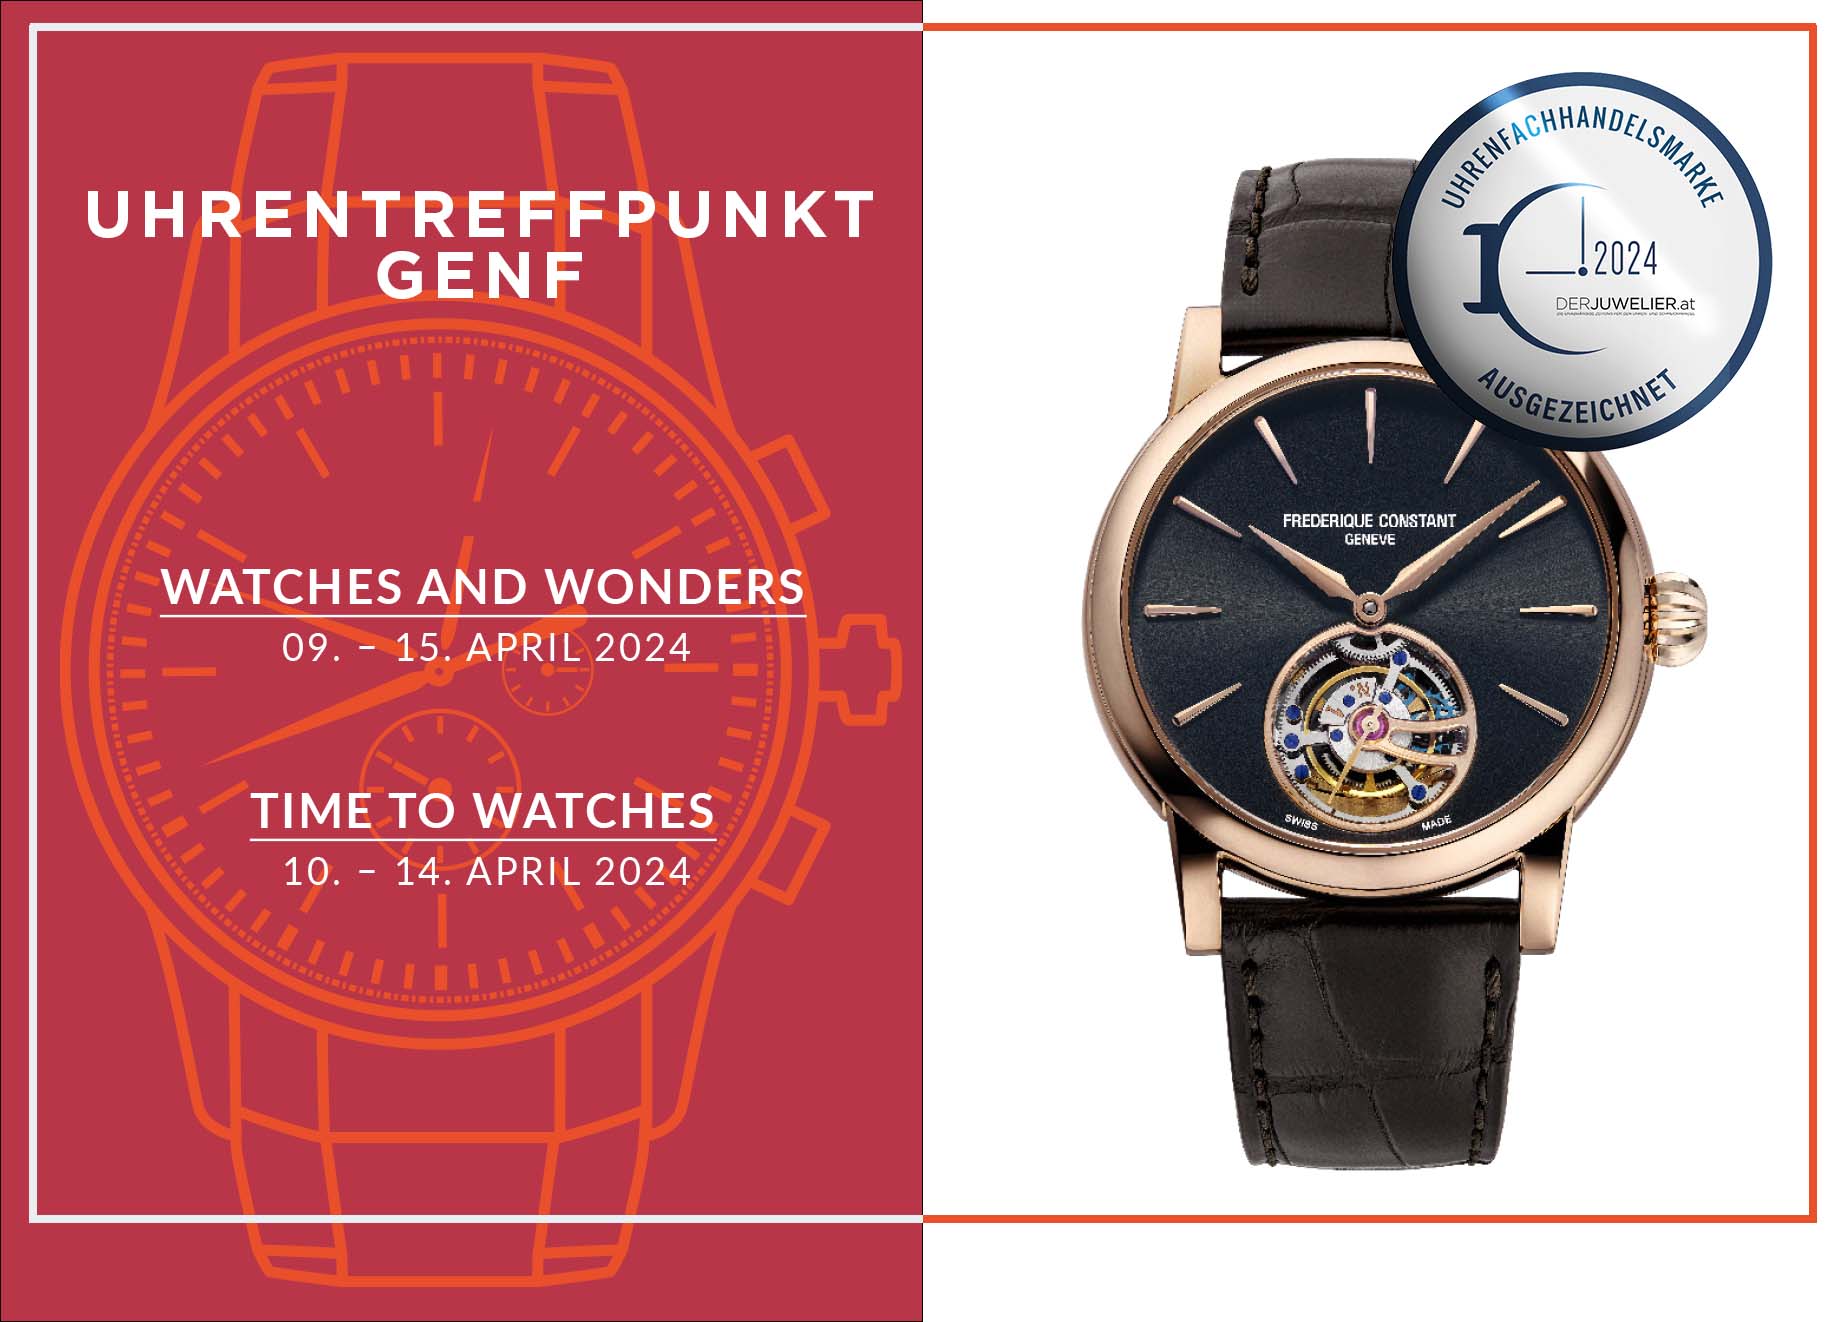 DJ_Frederique Constant Watches and Wonders 2024